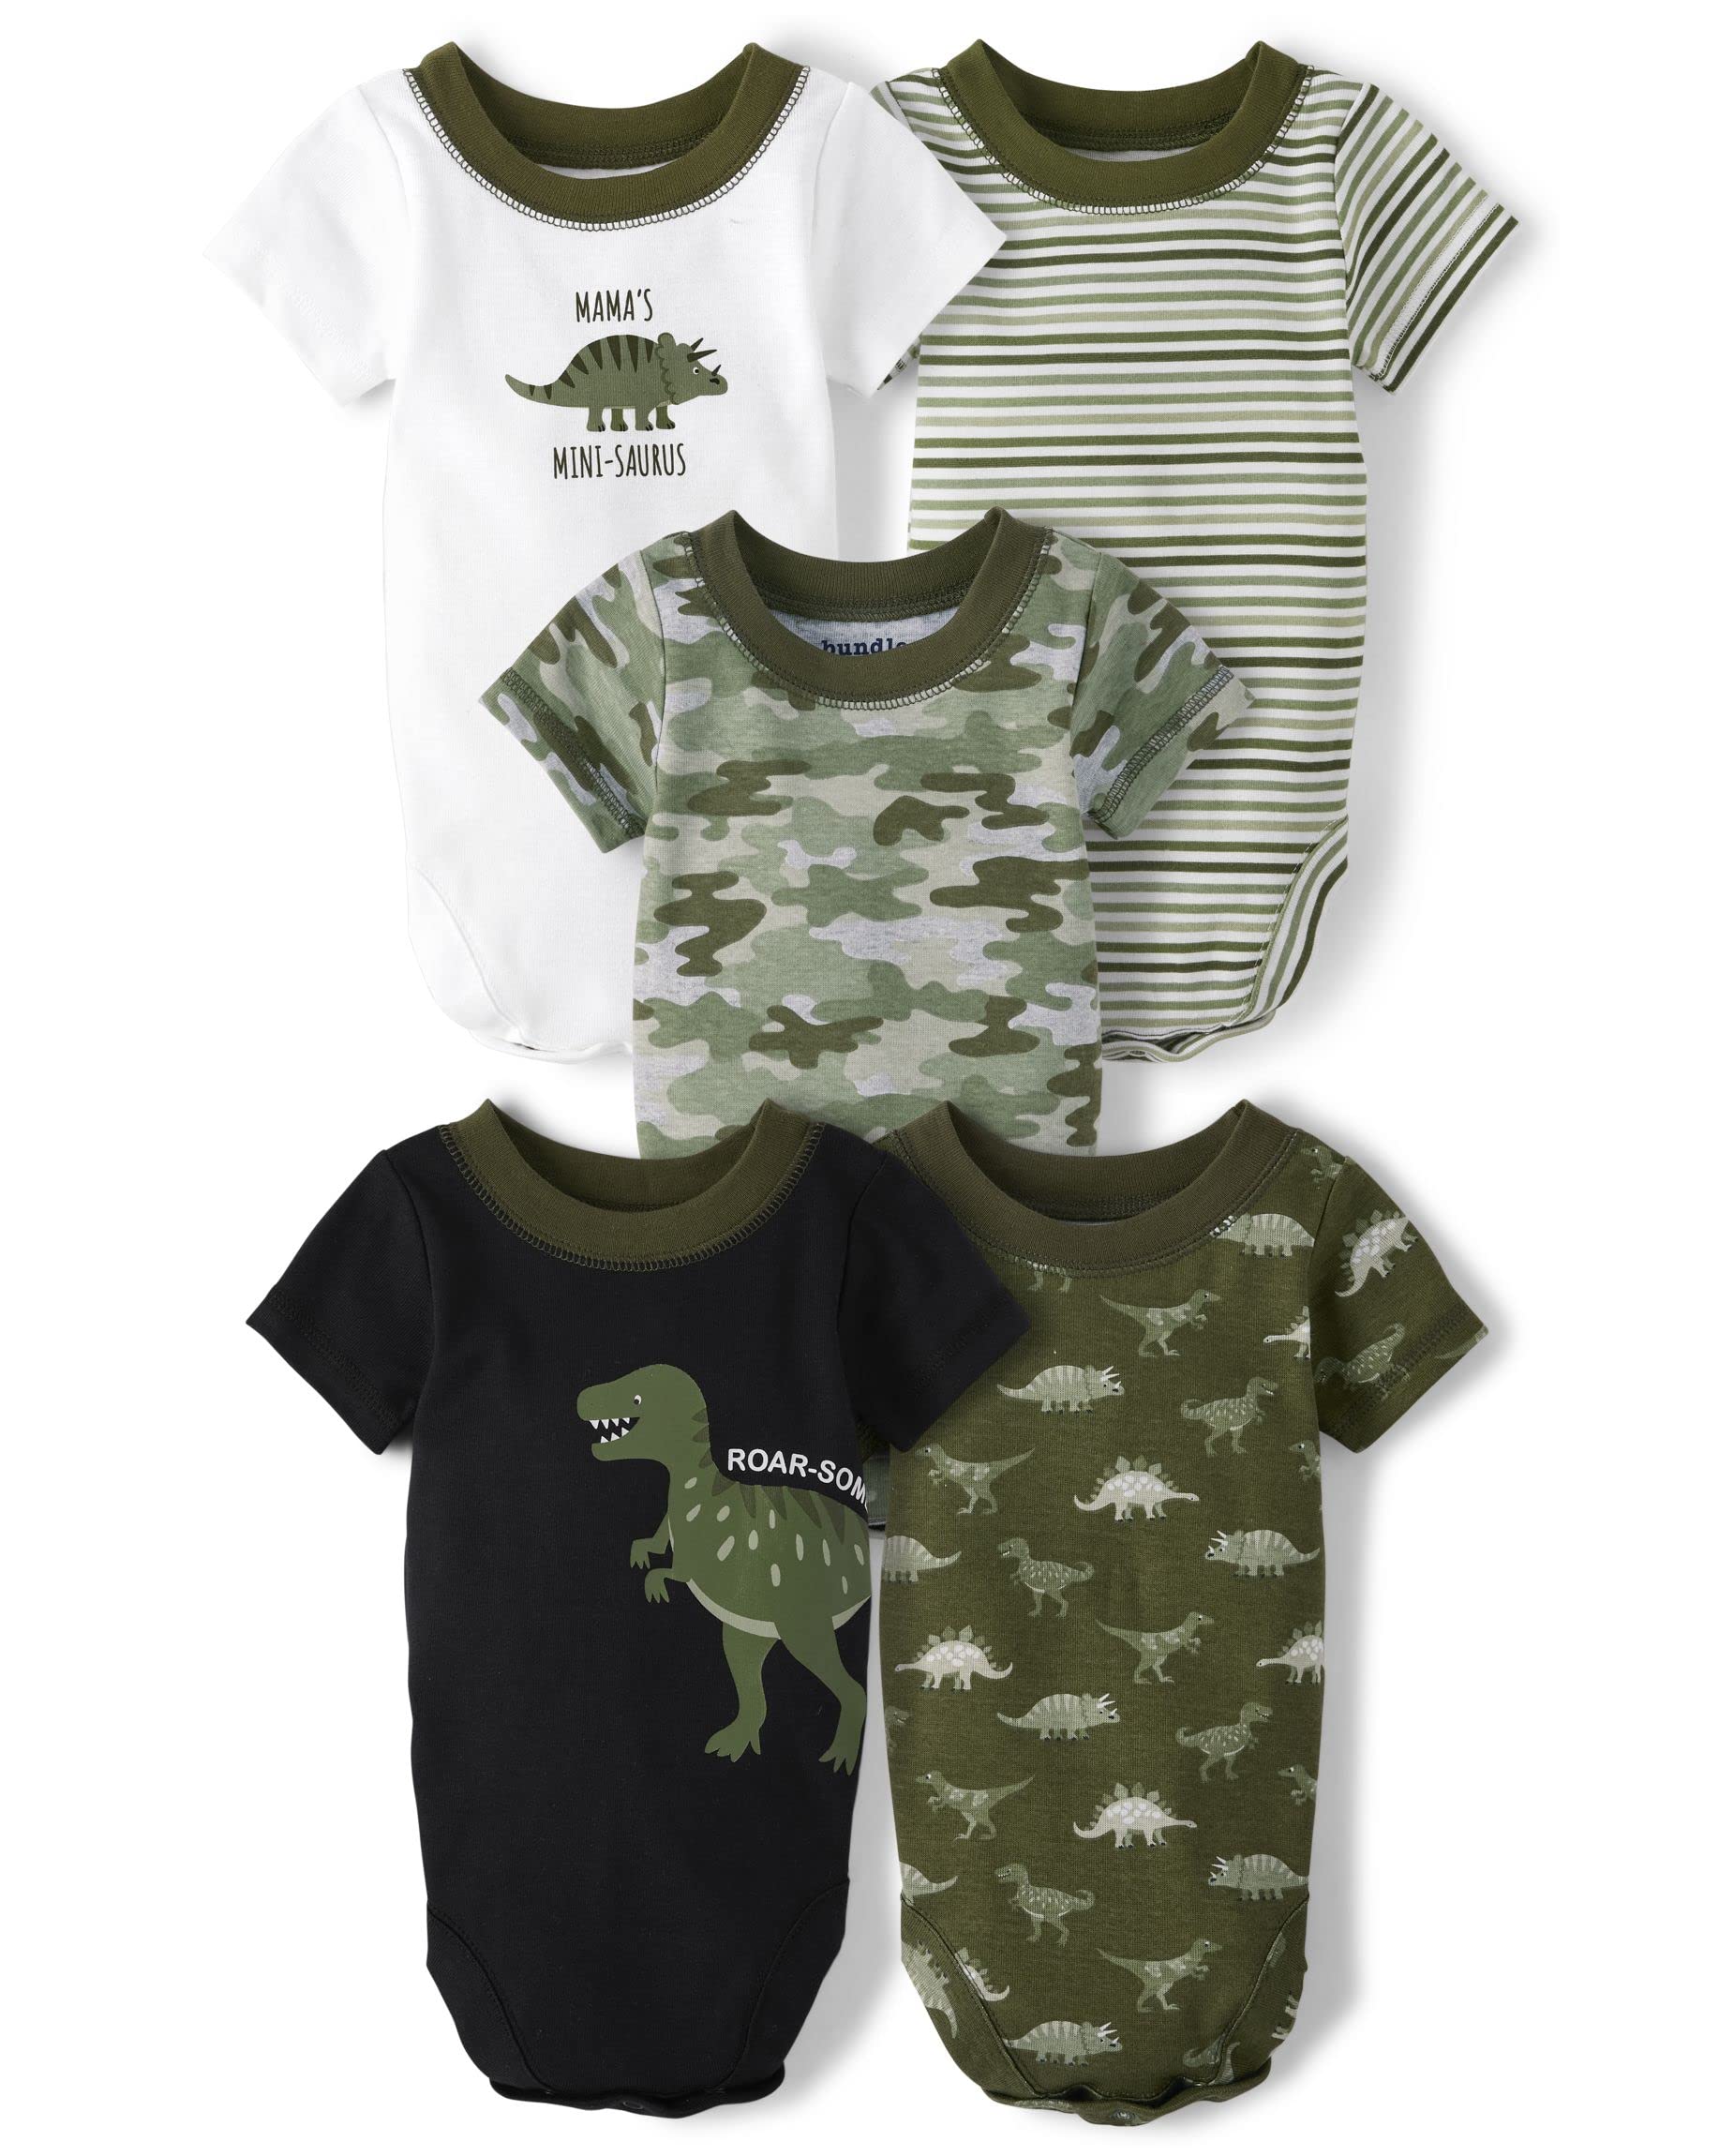 The Children's Place Baby Long Sleeve 100% Cotton Onesie Bodysuits 5-Pack, Black Dino/Green Camo/Green Striped/Olive Dino 5 Pack, 9-12 Months